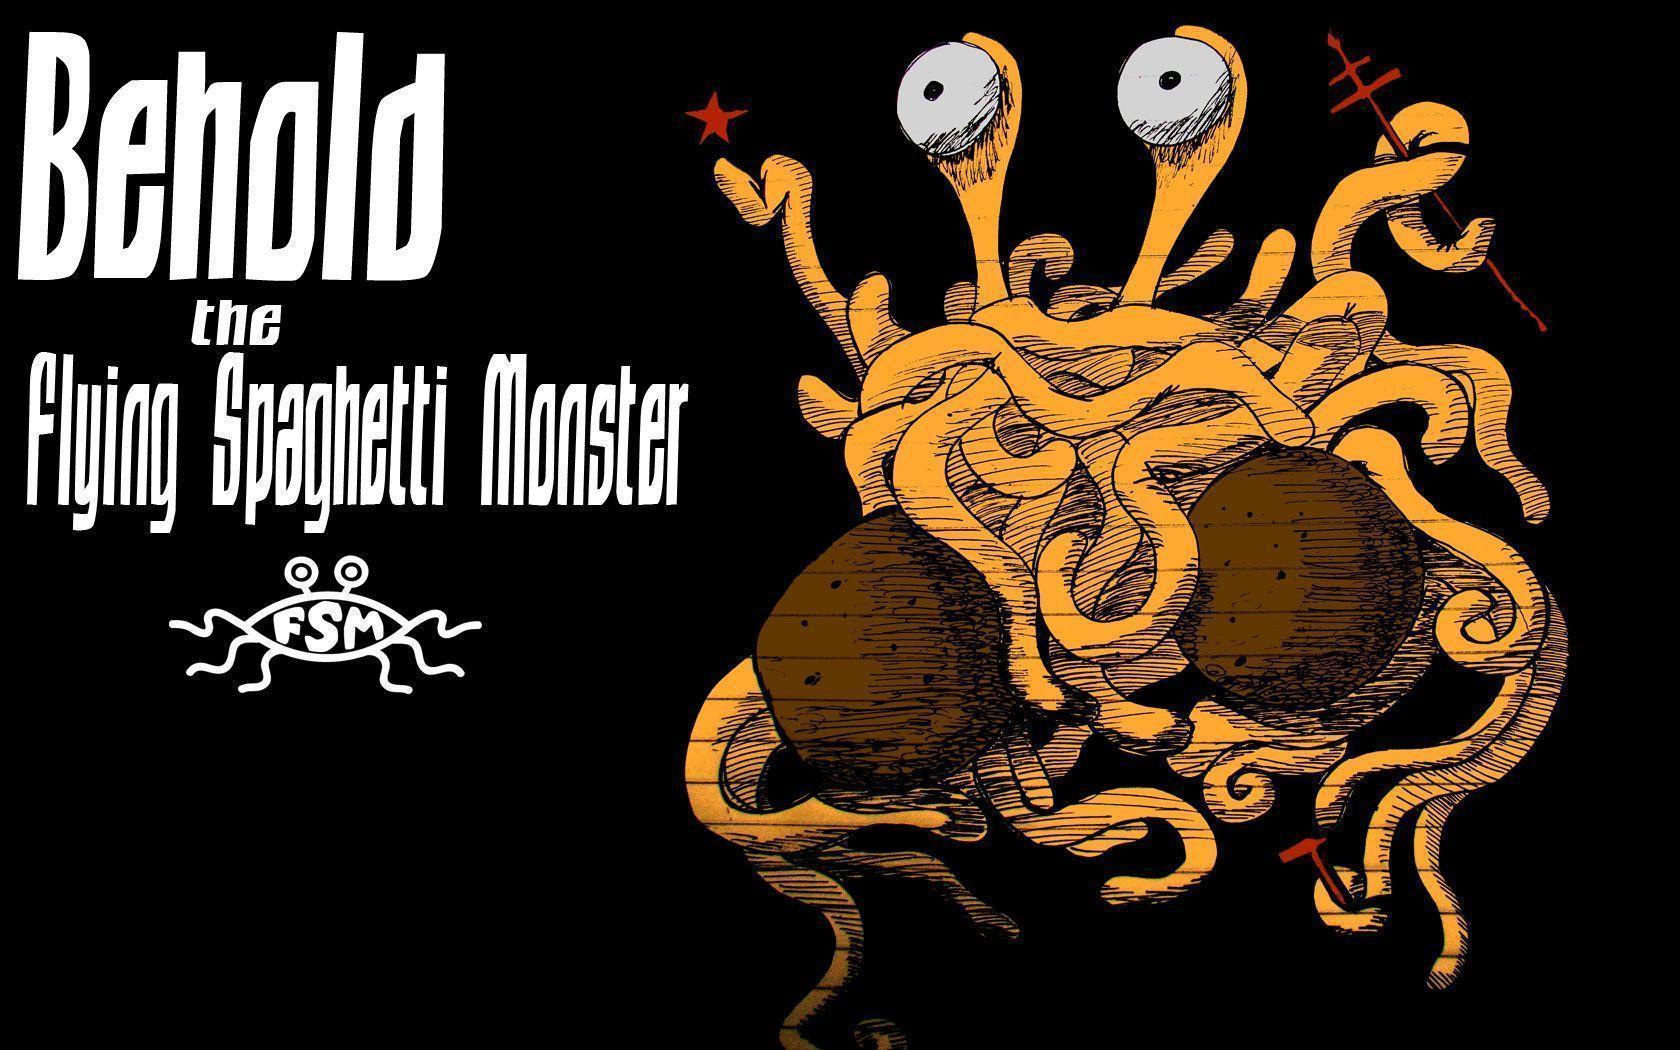 andre&wallpapers « Church of the Flying Spaghetti Monster